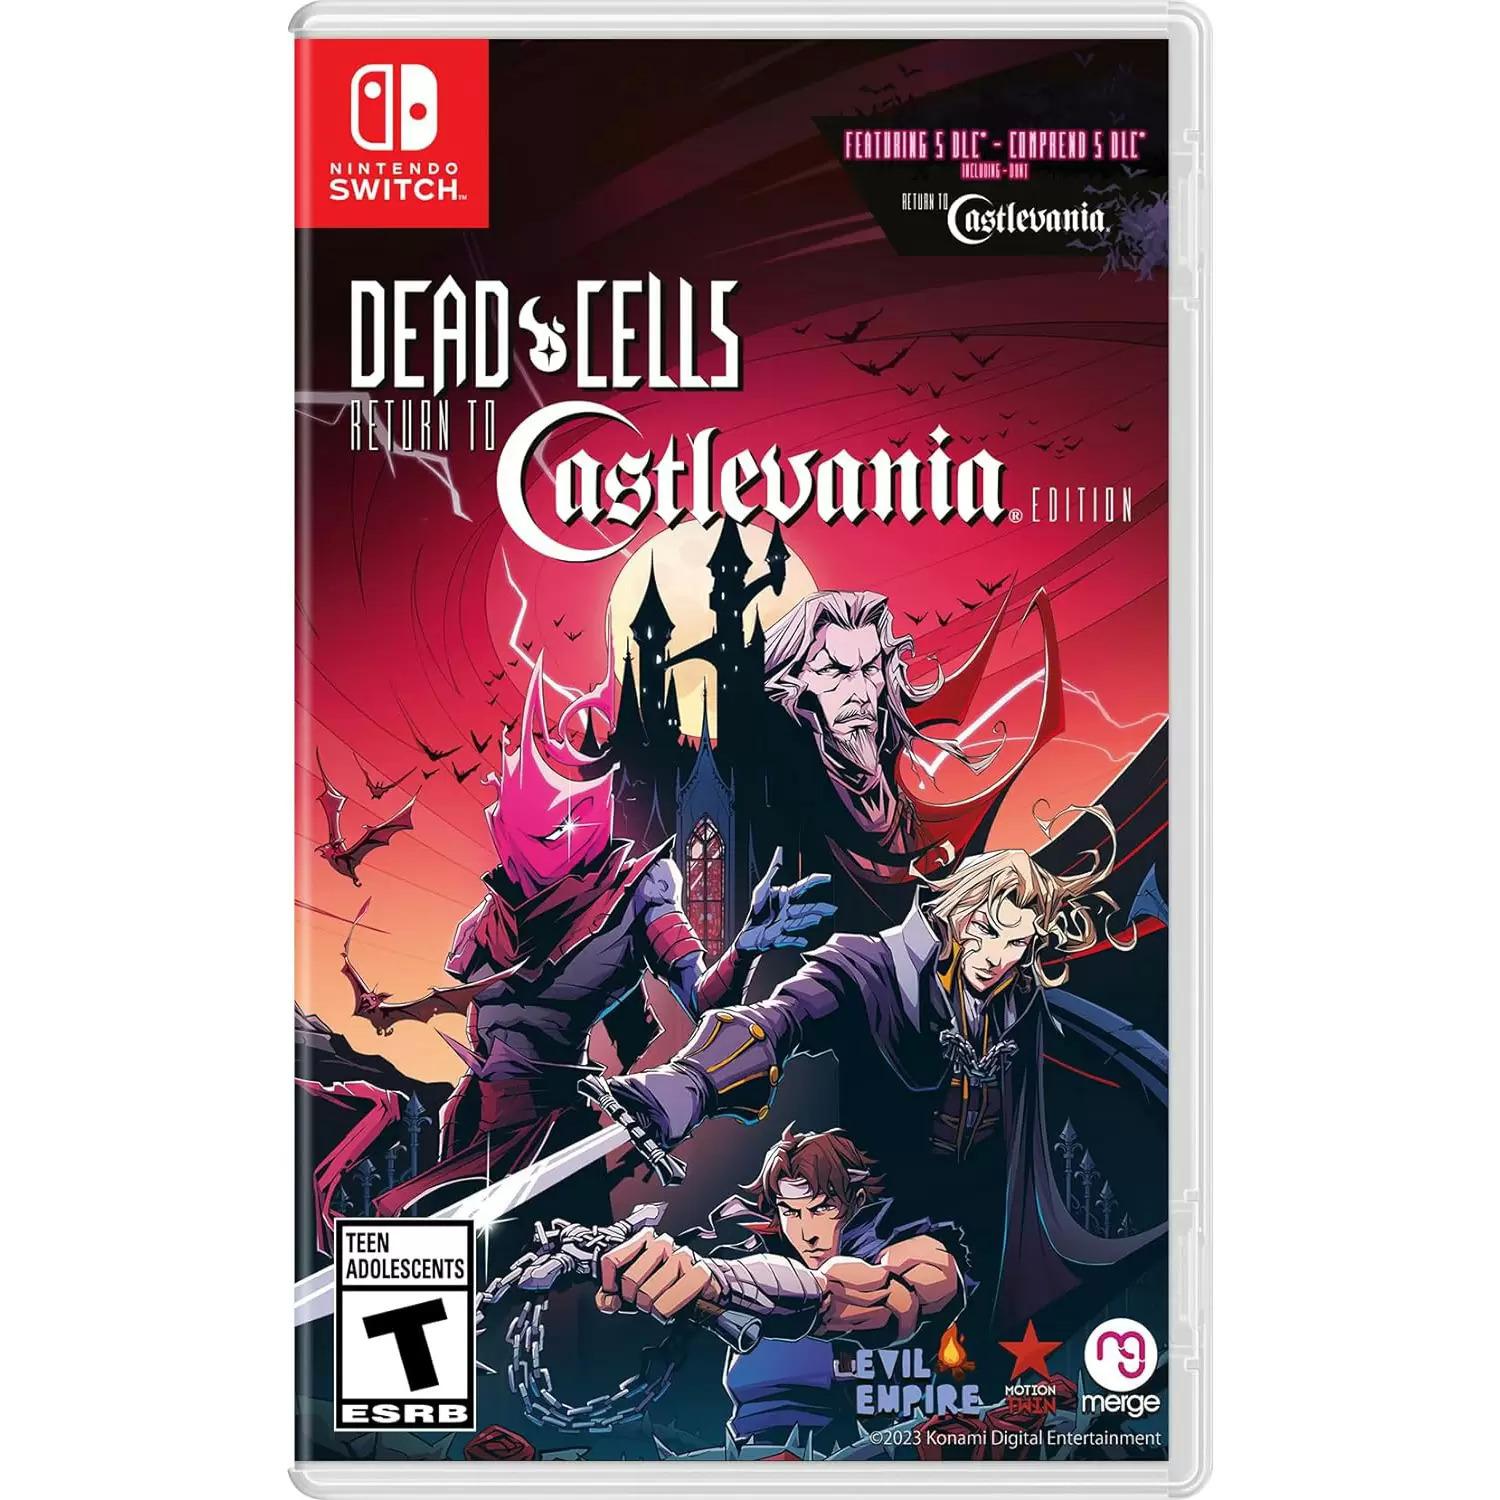 Dead Cells Return to Castlevania Edition Nintendo Switch for $21.99